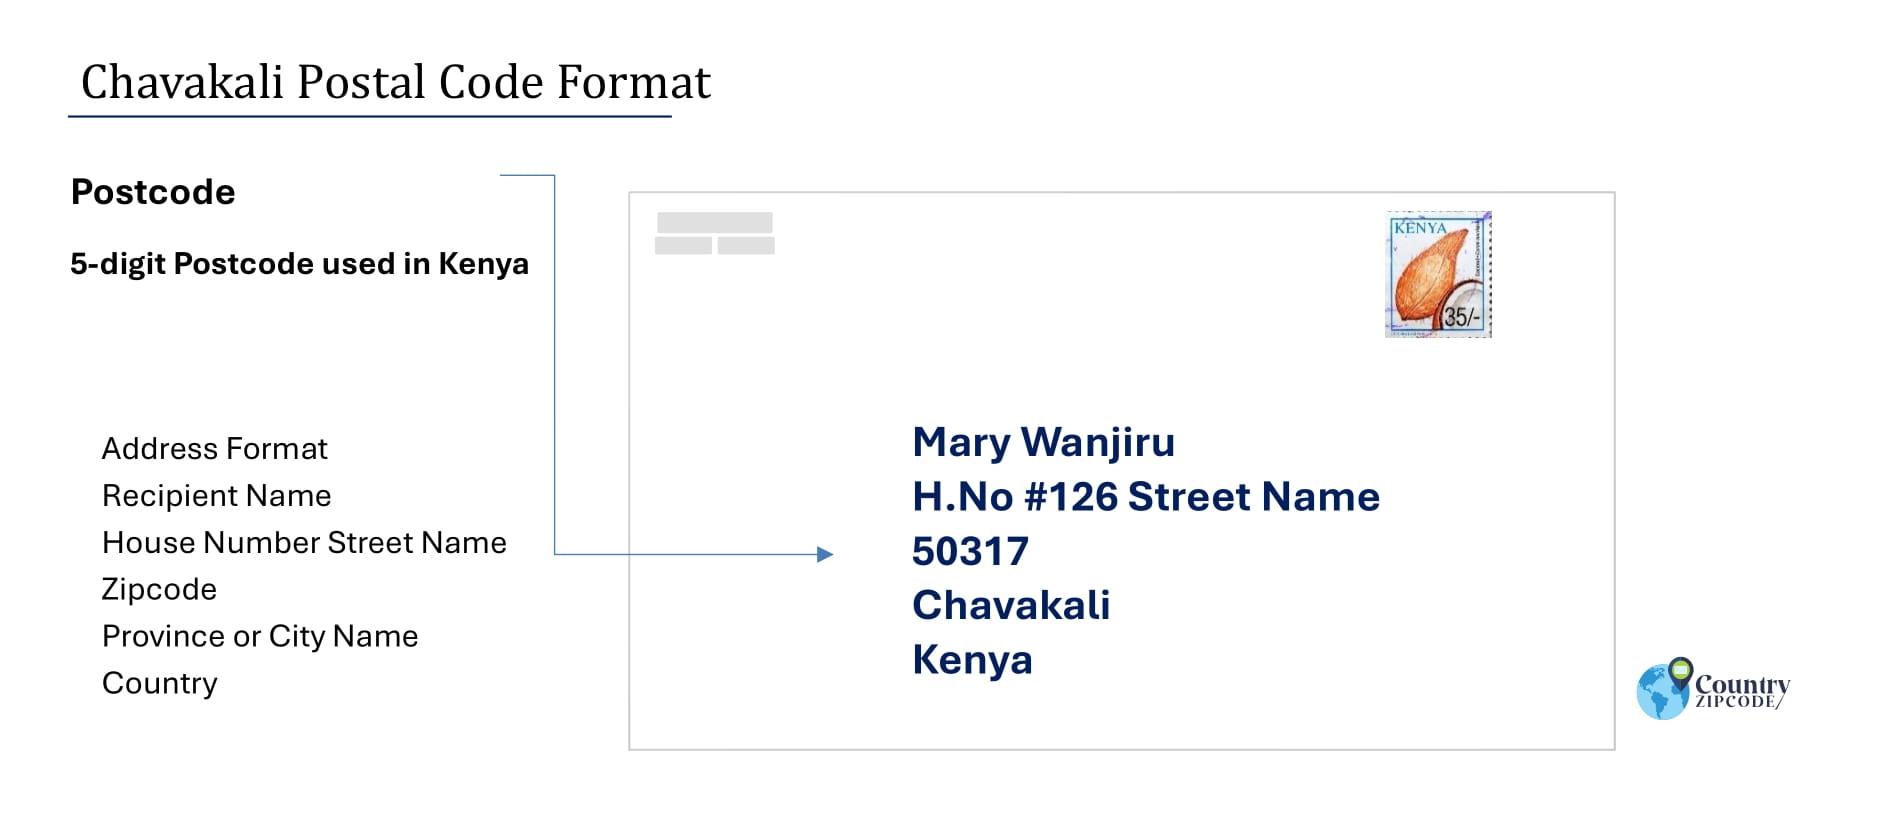 Example of Chavakali Address and postal code format